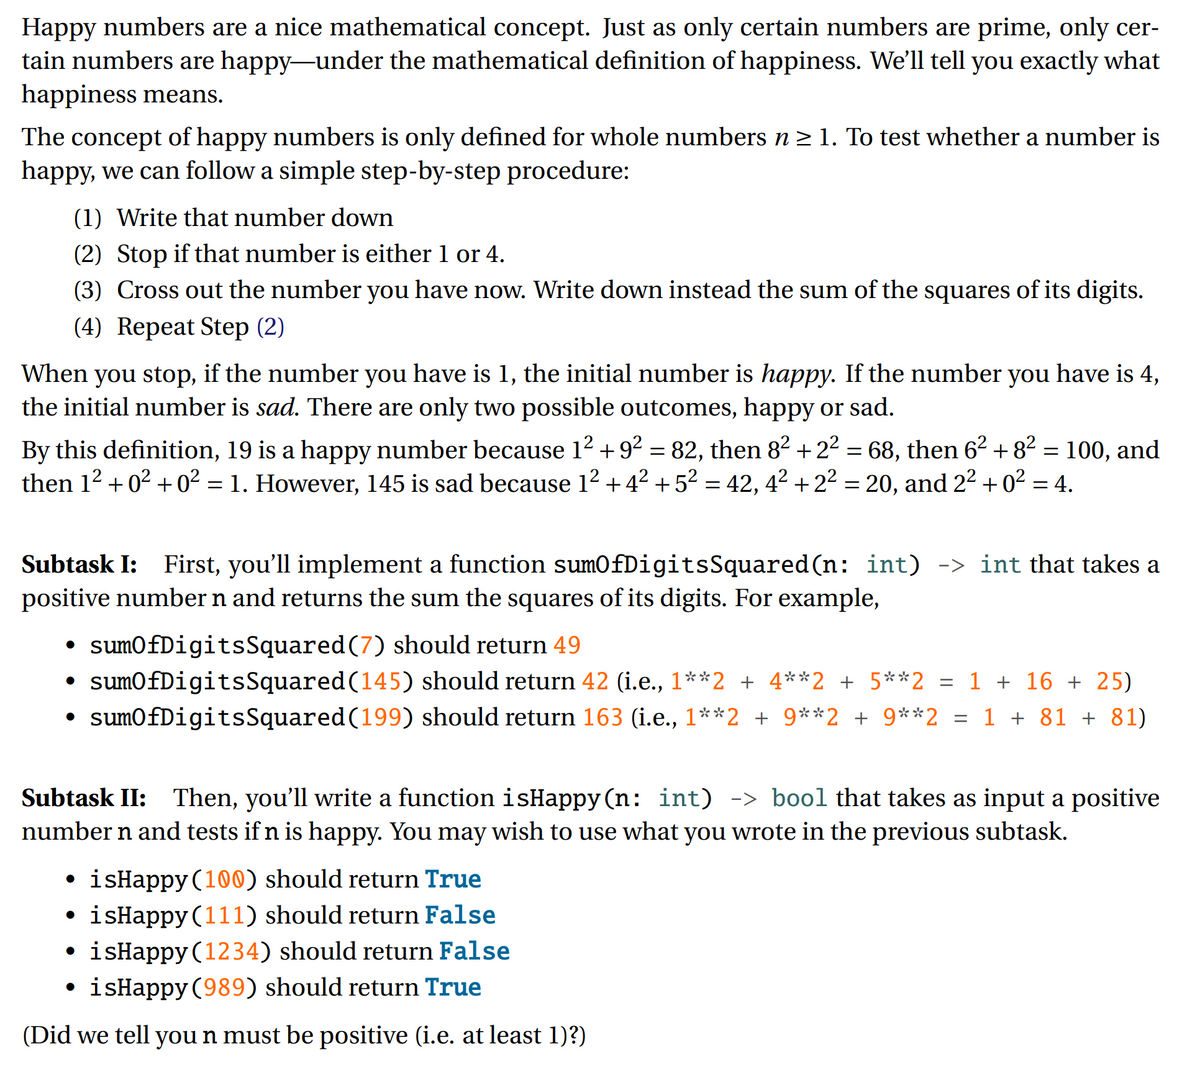 Happy numbers are a nice mathematical concept. Just as only certain numbers are prime, only cer-
tain numbers are happy-under the mathematical definition of happiness. We'll tell you exactly what
happiness means.
The concept of happy numbers is only defined for whole numbers n> 1. To test whether a number is
happy, we can follow a simple step-by-step procedure:
(1) Write that number down
(2) Stop if that number is either 1 or 4.
(3) Cross out the number you have now. Write down instead the sum of the squares of its digits.
(4) Repeat Step (2)
When you stop, if the number you have is 1, the initial number is happy. If the number you have is 4,
the initial number is sad. There are only two possible outcomes, happy or sad.
By this definition, 19 is a happy number because 12 + 92 = 82, then 82 + 22 = 68, then 62 + 8² = 100, and
then 12 + 02 + 0² = 1. However, 145 is sad because 12 + 42 +52 = 42, 42 +22 = 20, and 22 +02 = 4.
Subtask I: First, you'll implement a function sumOfDigitsSquared(n: int) -> int that takes a
positive number n and returns the sum the squares of its digits. For example,
• sumOfDigitsSquared(7) should return 49
sumOfDigitsSquared(145) should return 42 (i.e., 1**2 + 4**2 + 5**2 = 1 + 16 + 25)
• sumOfDigitsSquared(199) should return 163 (i.e., 1**2 + 9**2 + 9**2 = 1 + 81 + 81)
Subtask II: Then, you'll write a function isHappy (n: int) -> bool that takes as input a positive
number n and tests if n is happy. You may wish to use what you wrote in the previous subtask.
isHappy (100) should return True
• isHappy (111) should return False
• isHappy (1234) should return False
isHappy (989) should return True
(Did we tell you n must be positive (i.e. at least 1)?)
